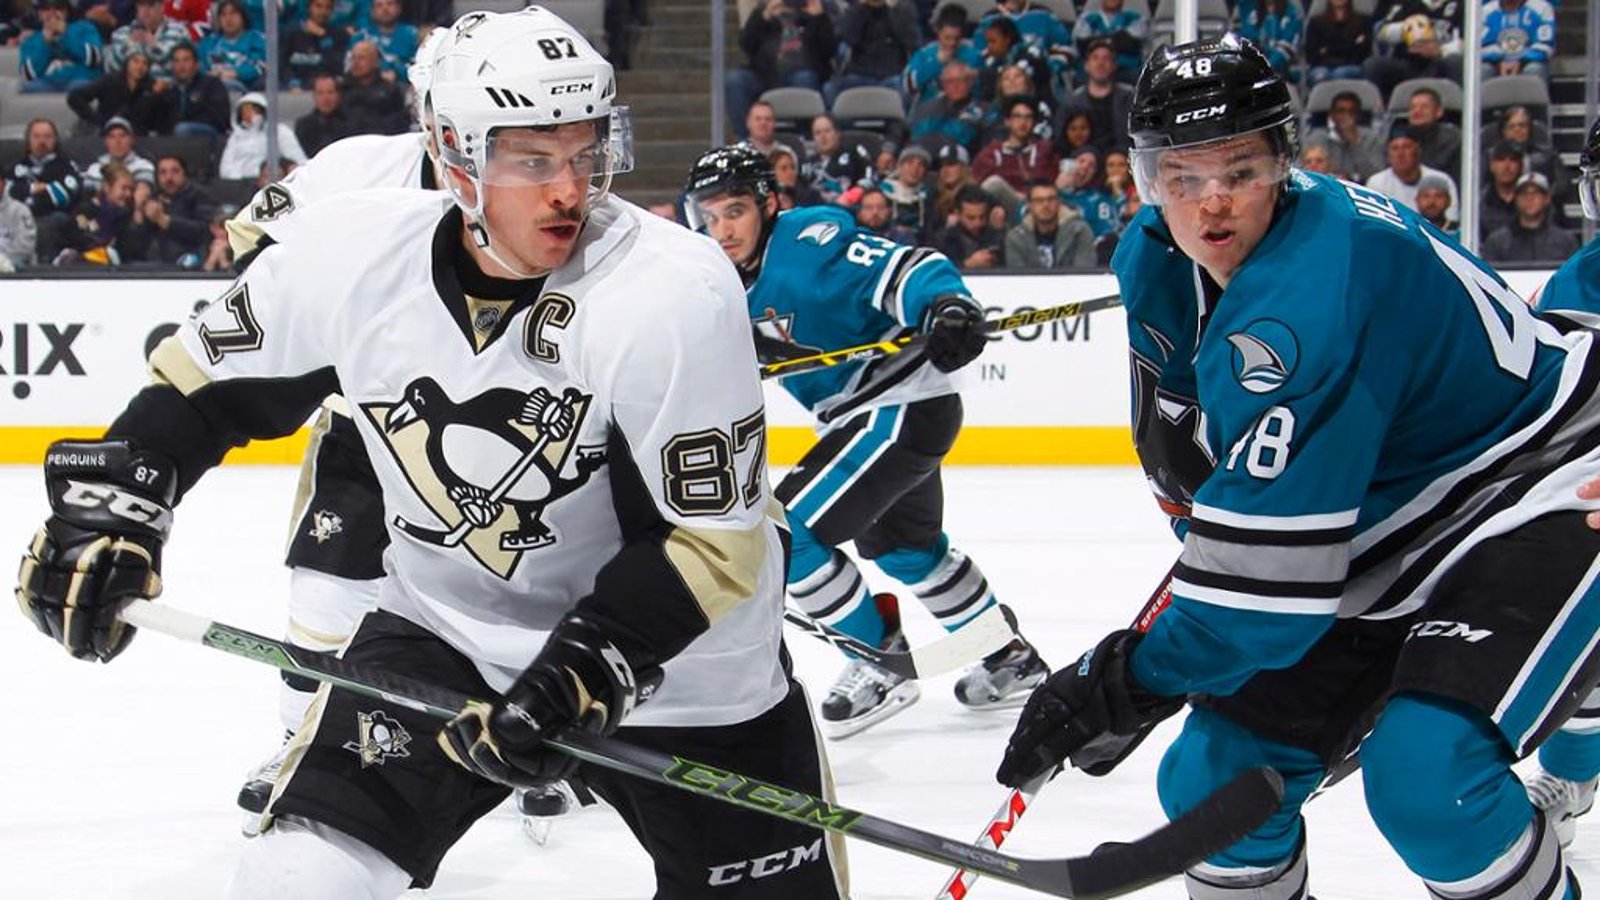 Pens and Sharks players could be contaminated by employee with coronavirus on March 3 